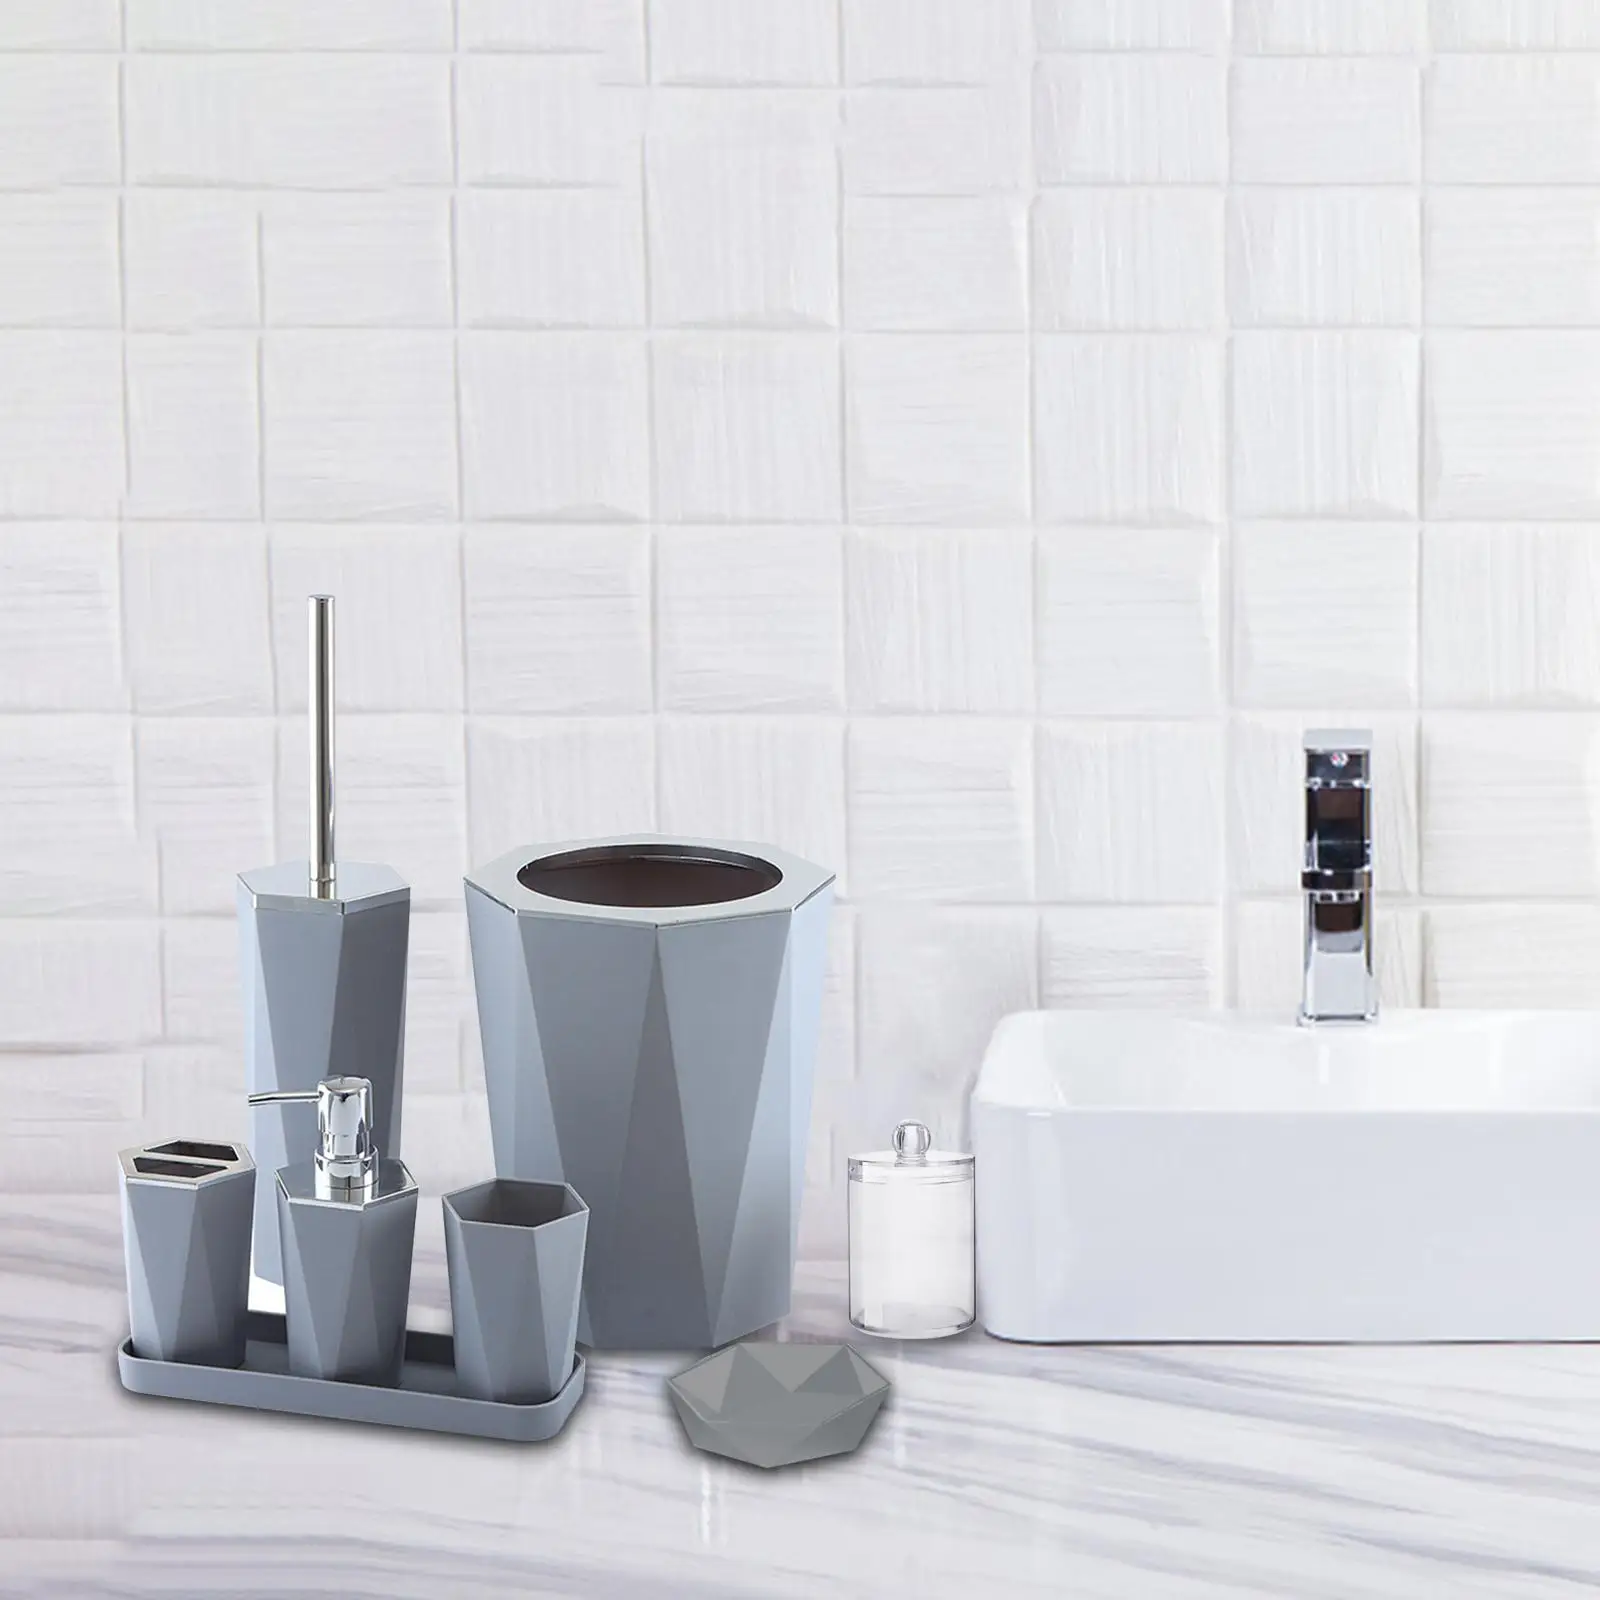 7Pcs Bathroom Accessories Set Toilet Brush Toothbrush Cup and Soap Dispenser and Soap Dish and Tumbler for Countertop Toilet